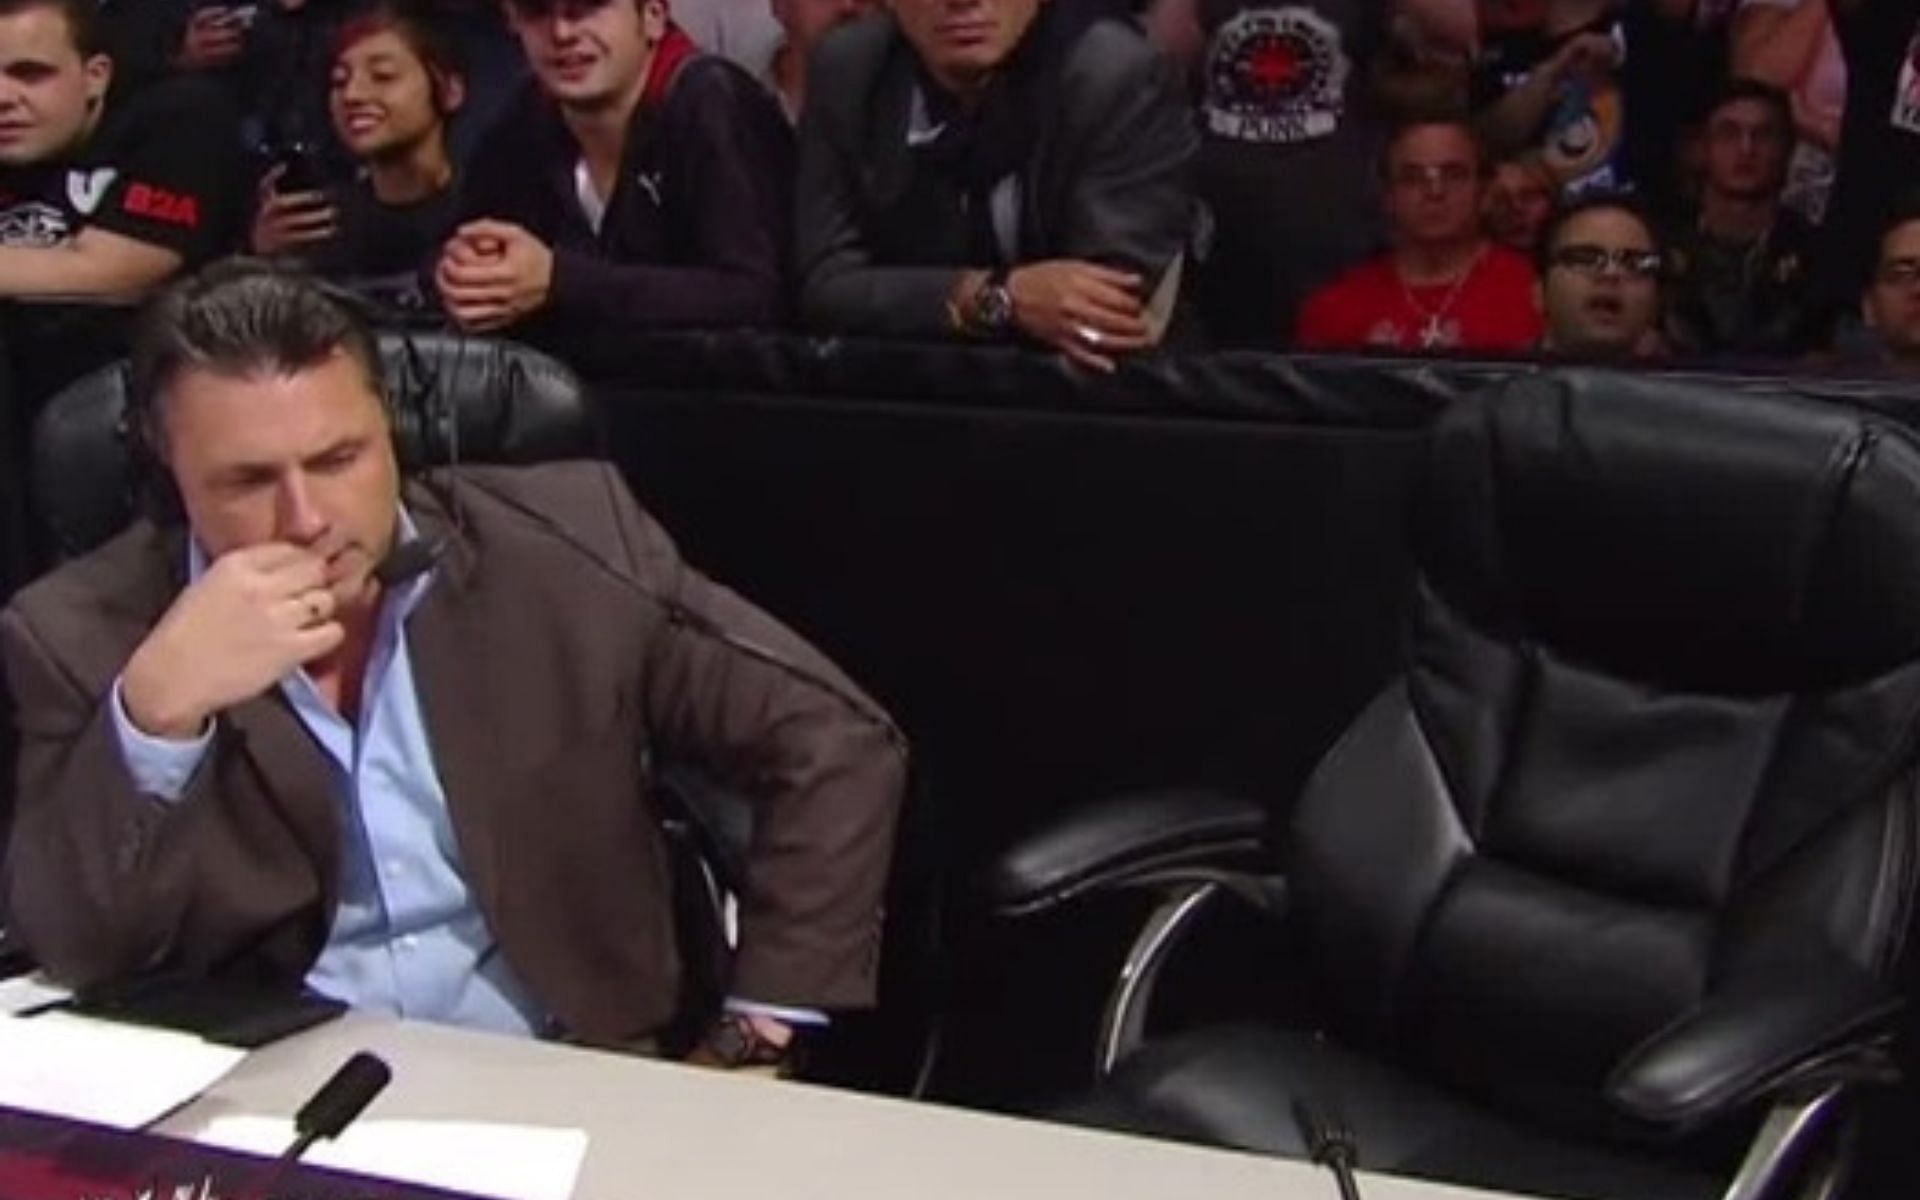 Michael Cole was visibly shocked by the surreal moment